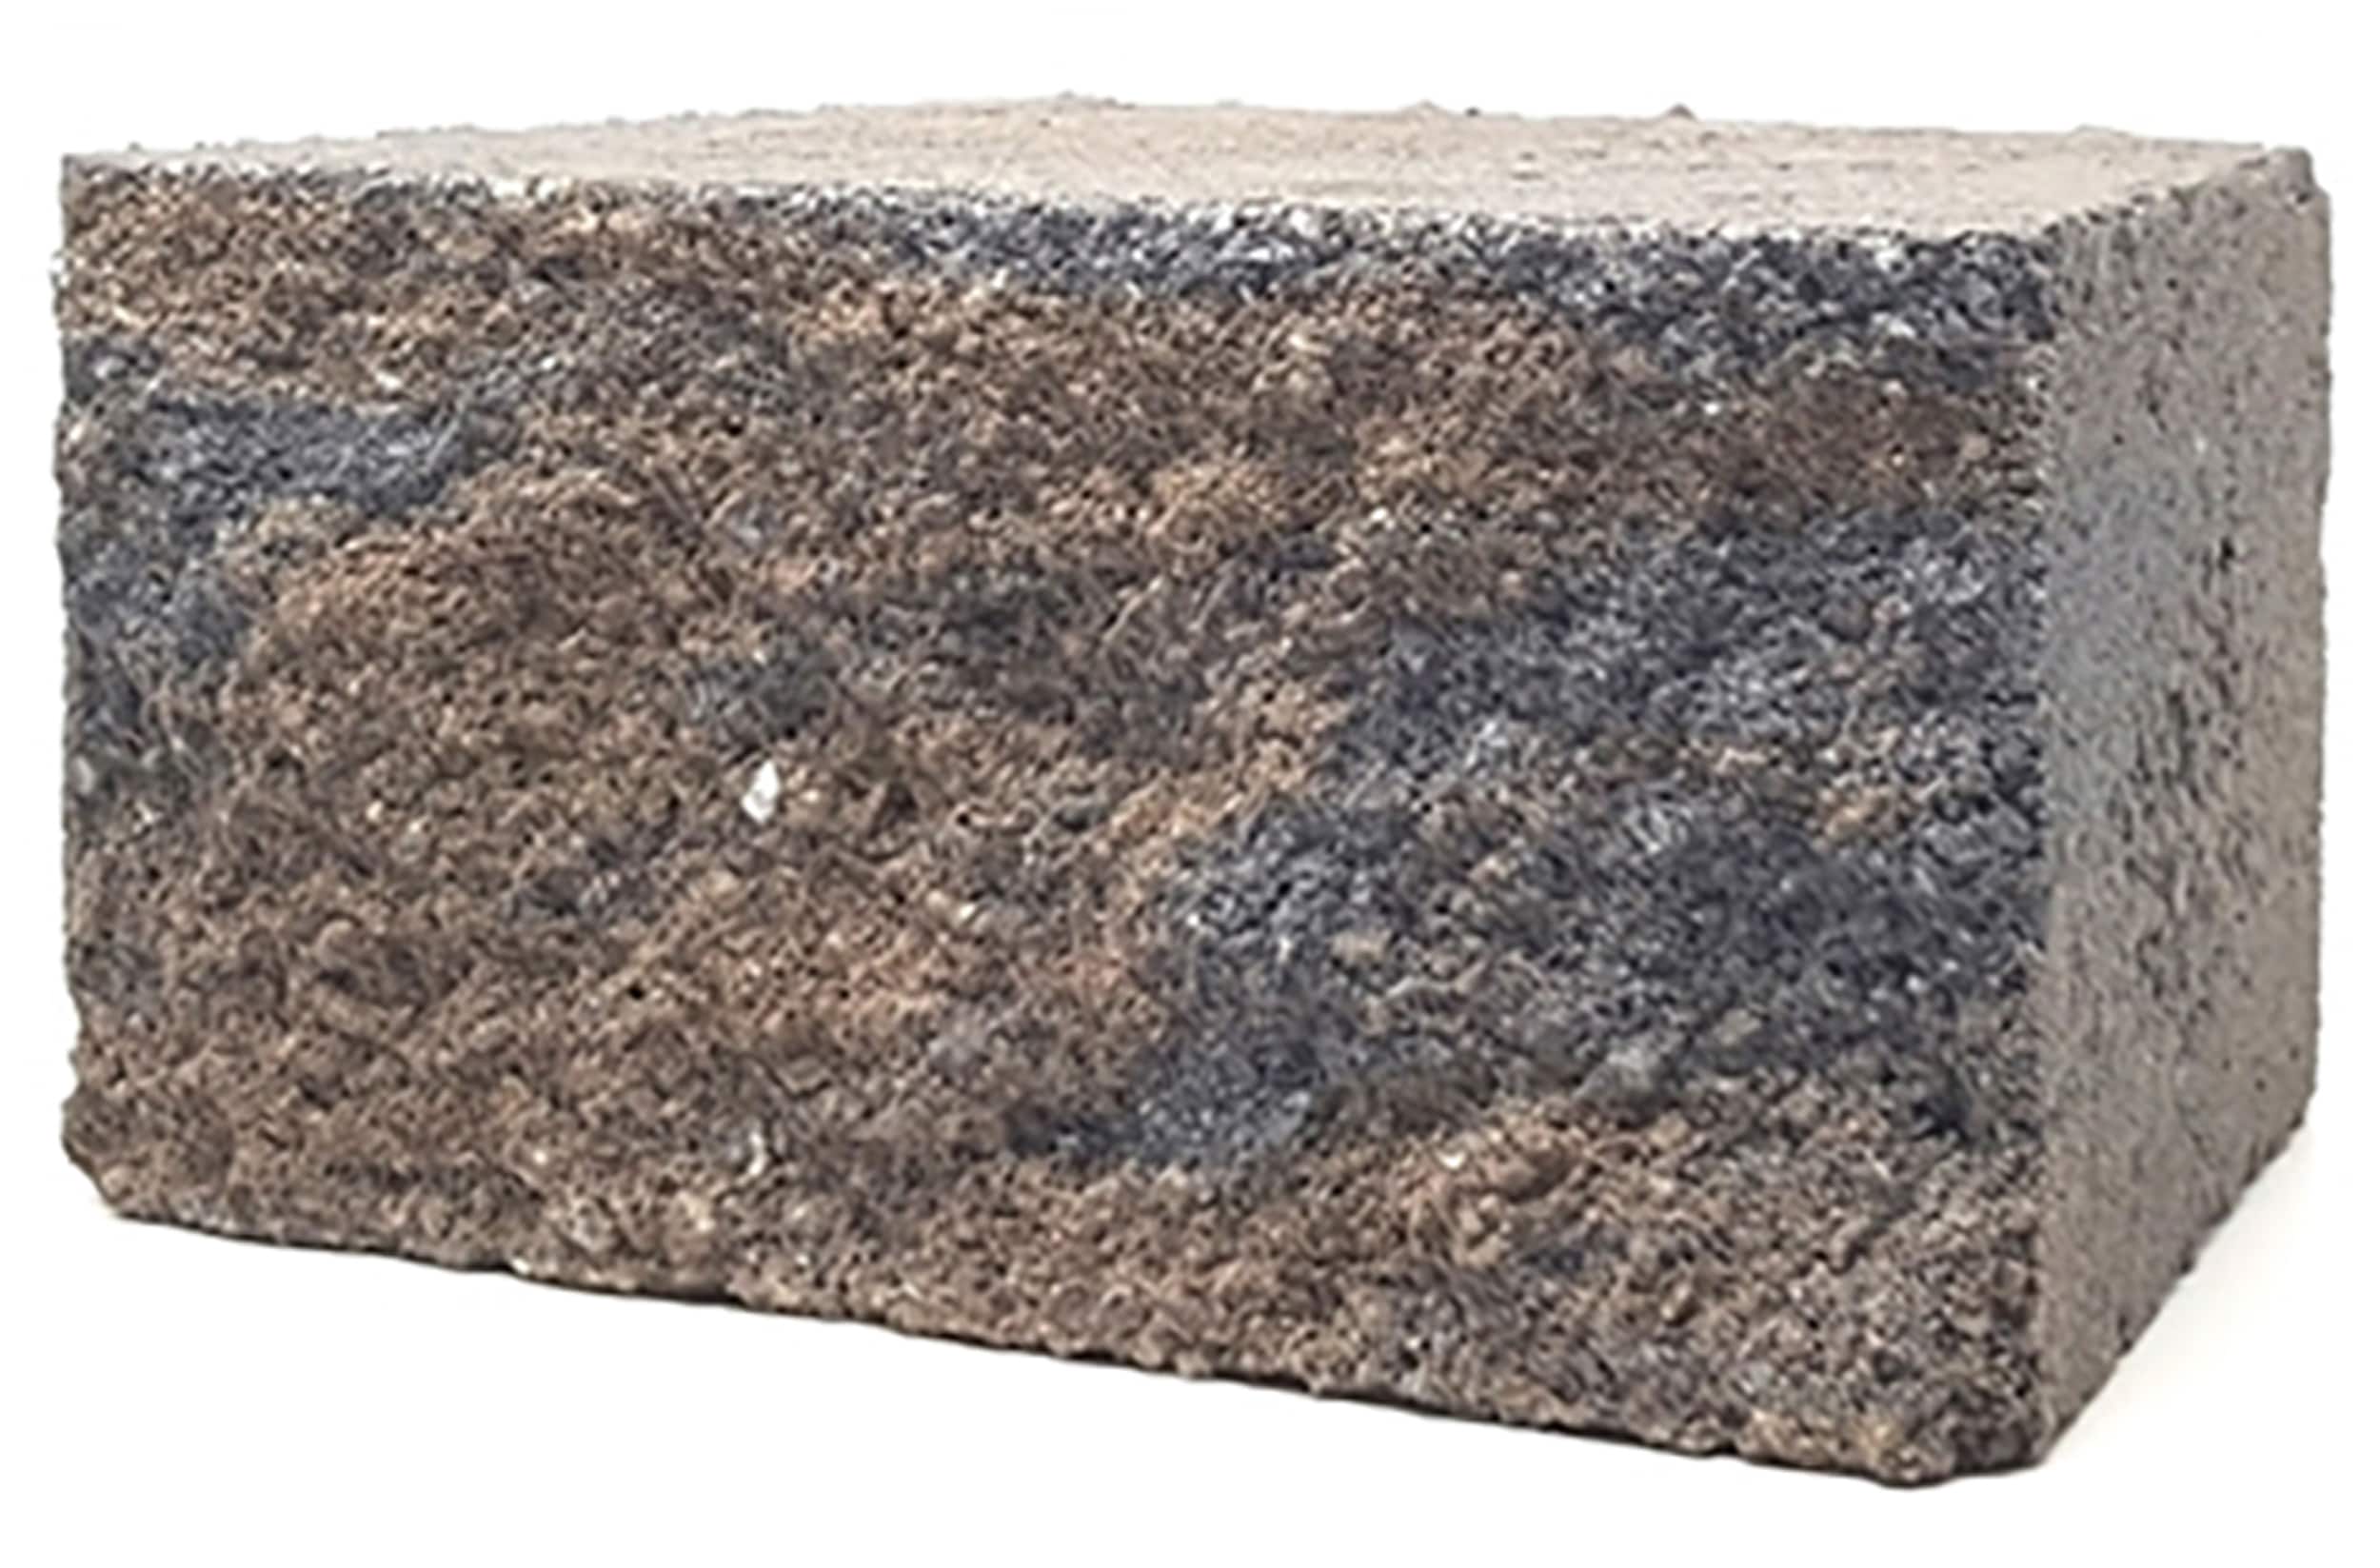 4-in H x 8-in L x 5.5-in D Brown/Charcoal Concrete Retaining Wall Block | - Lowe's SWSB